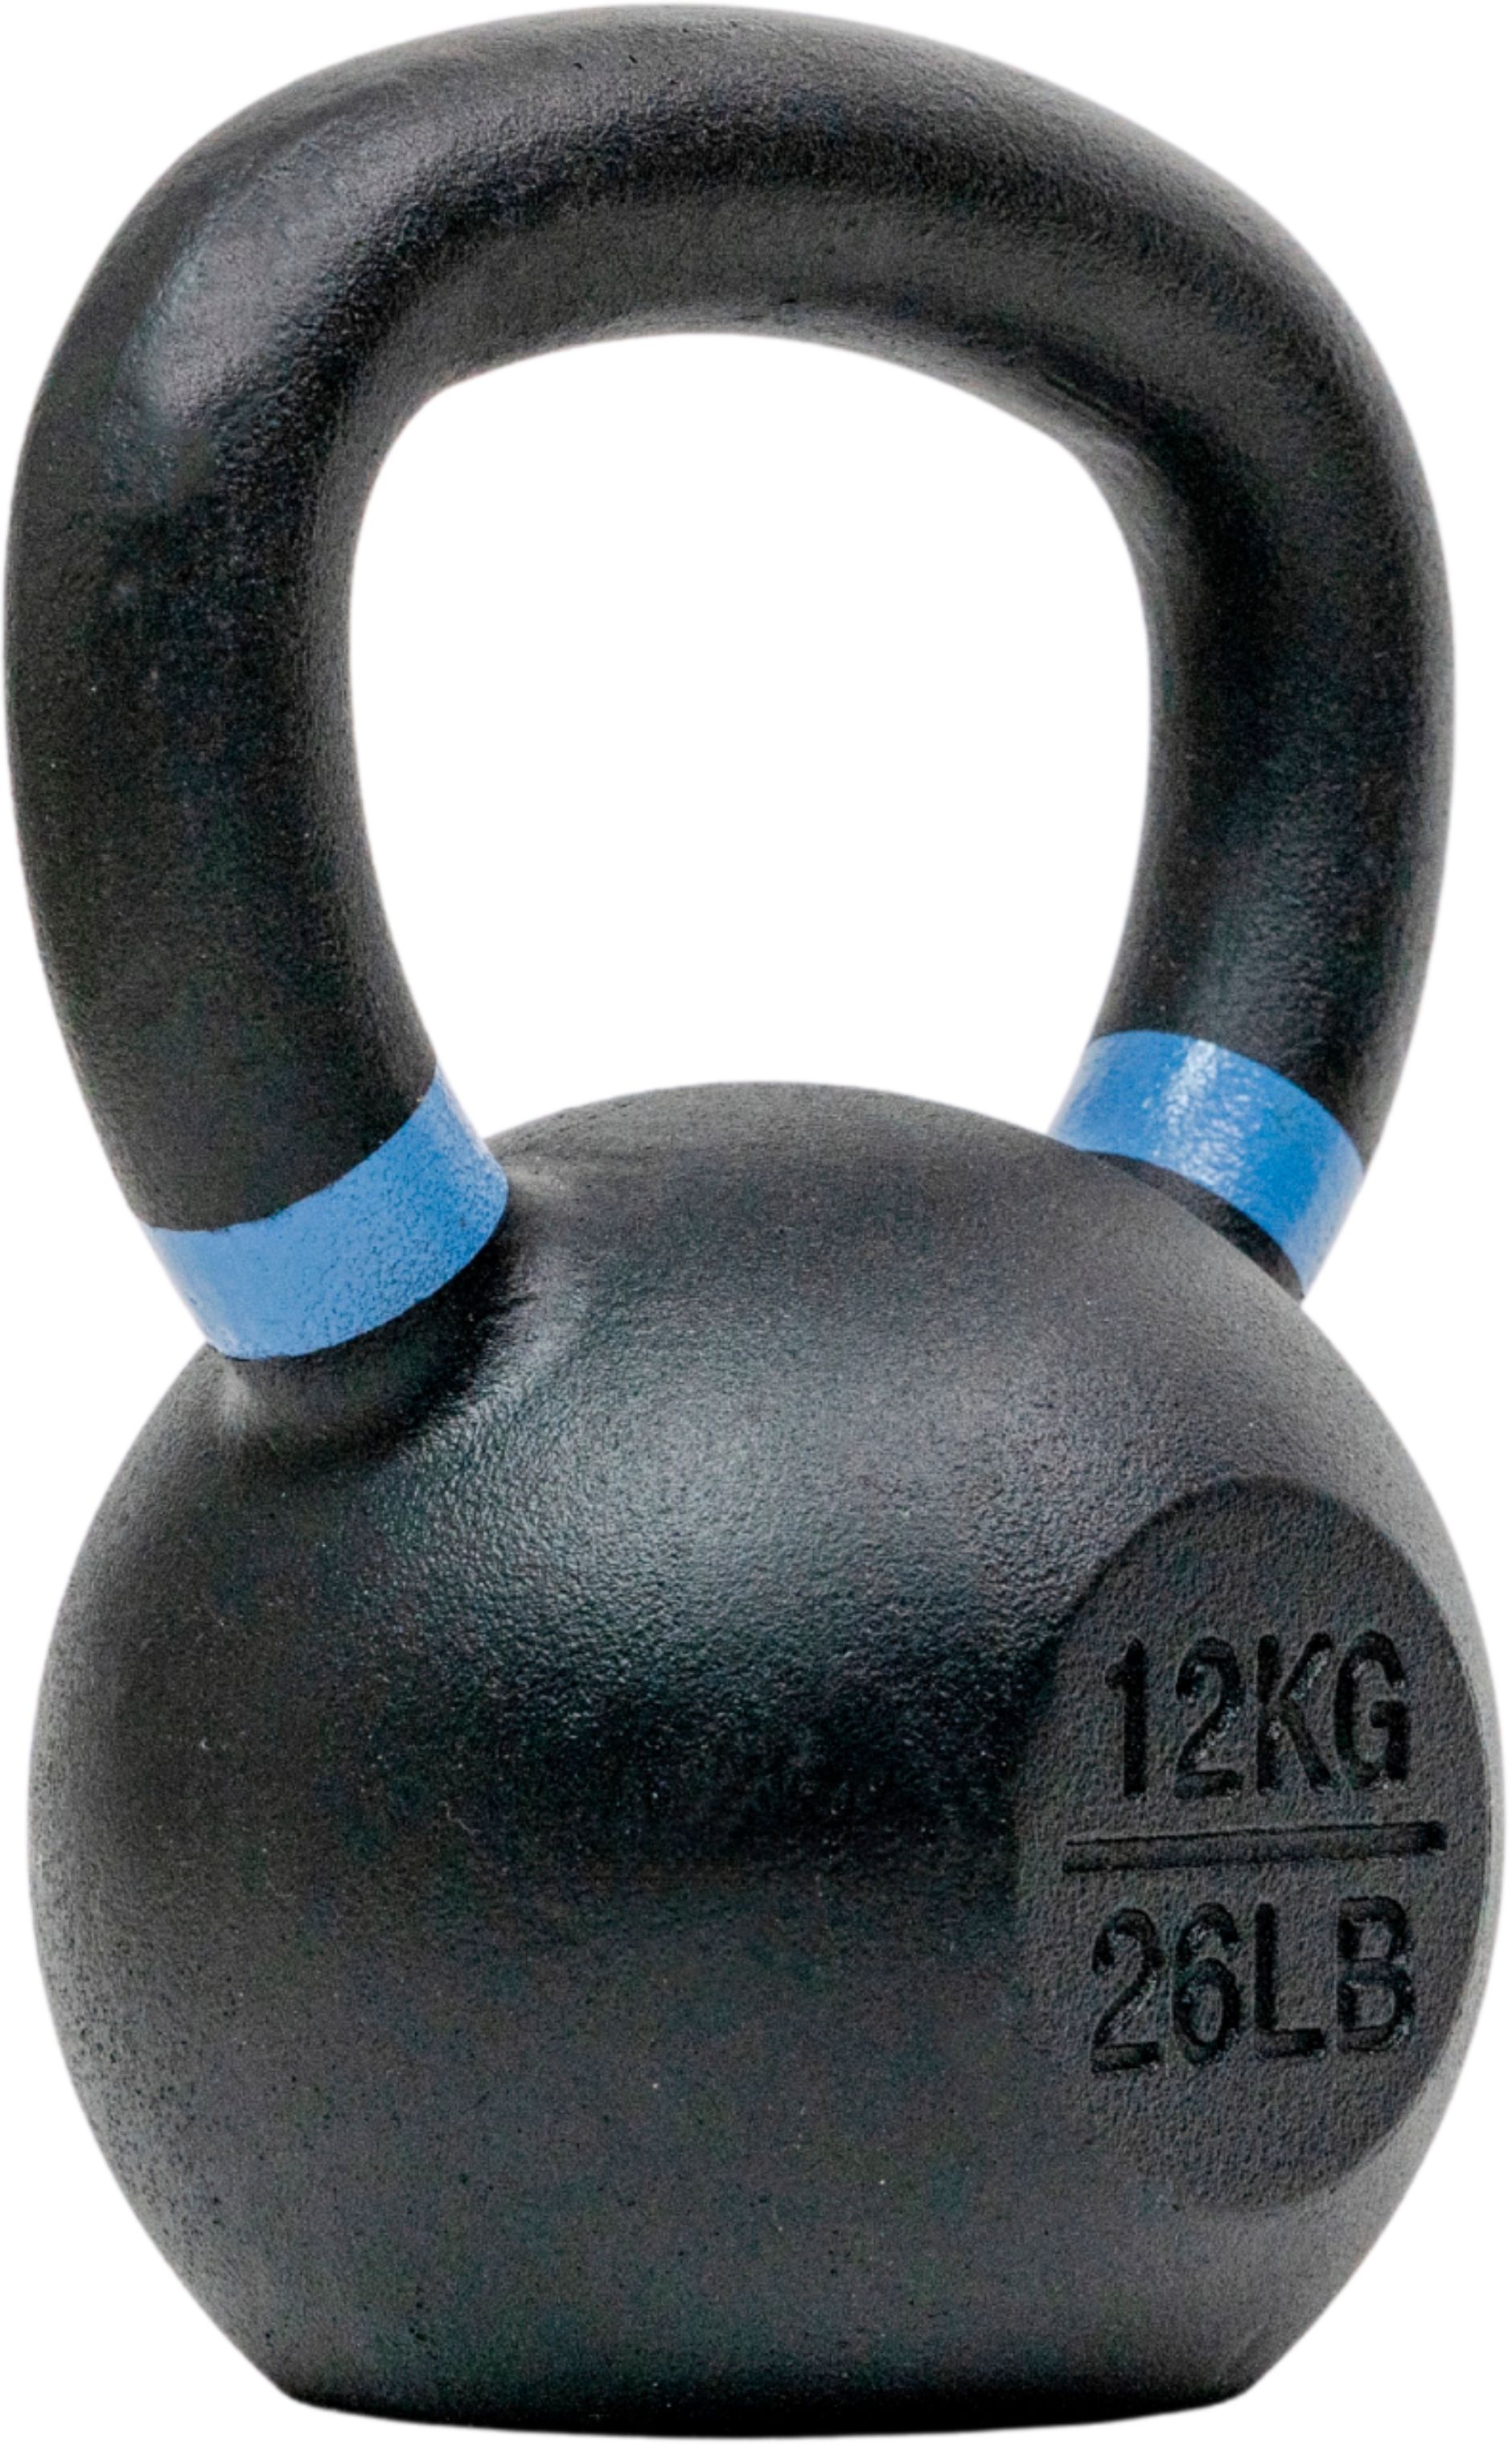 Supreme Tru Grit Cast Iron Kettlebell 6kg (13.2 Lbs)AUTHENTIC**CONFIRMED  ORDER**